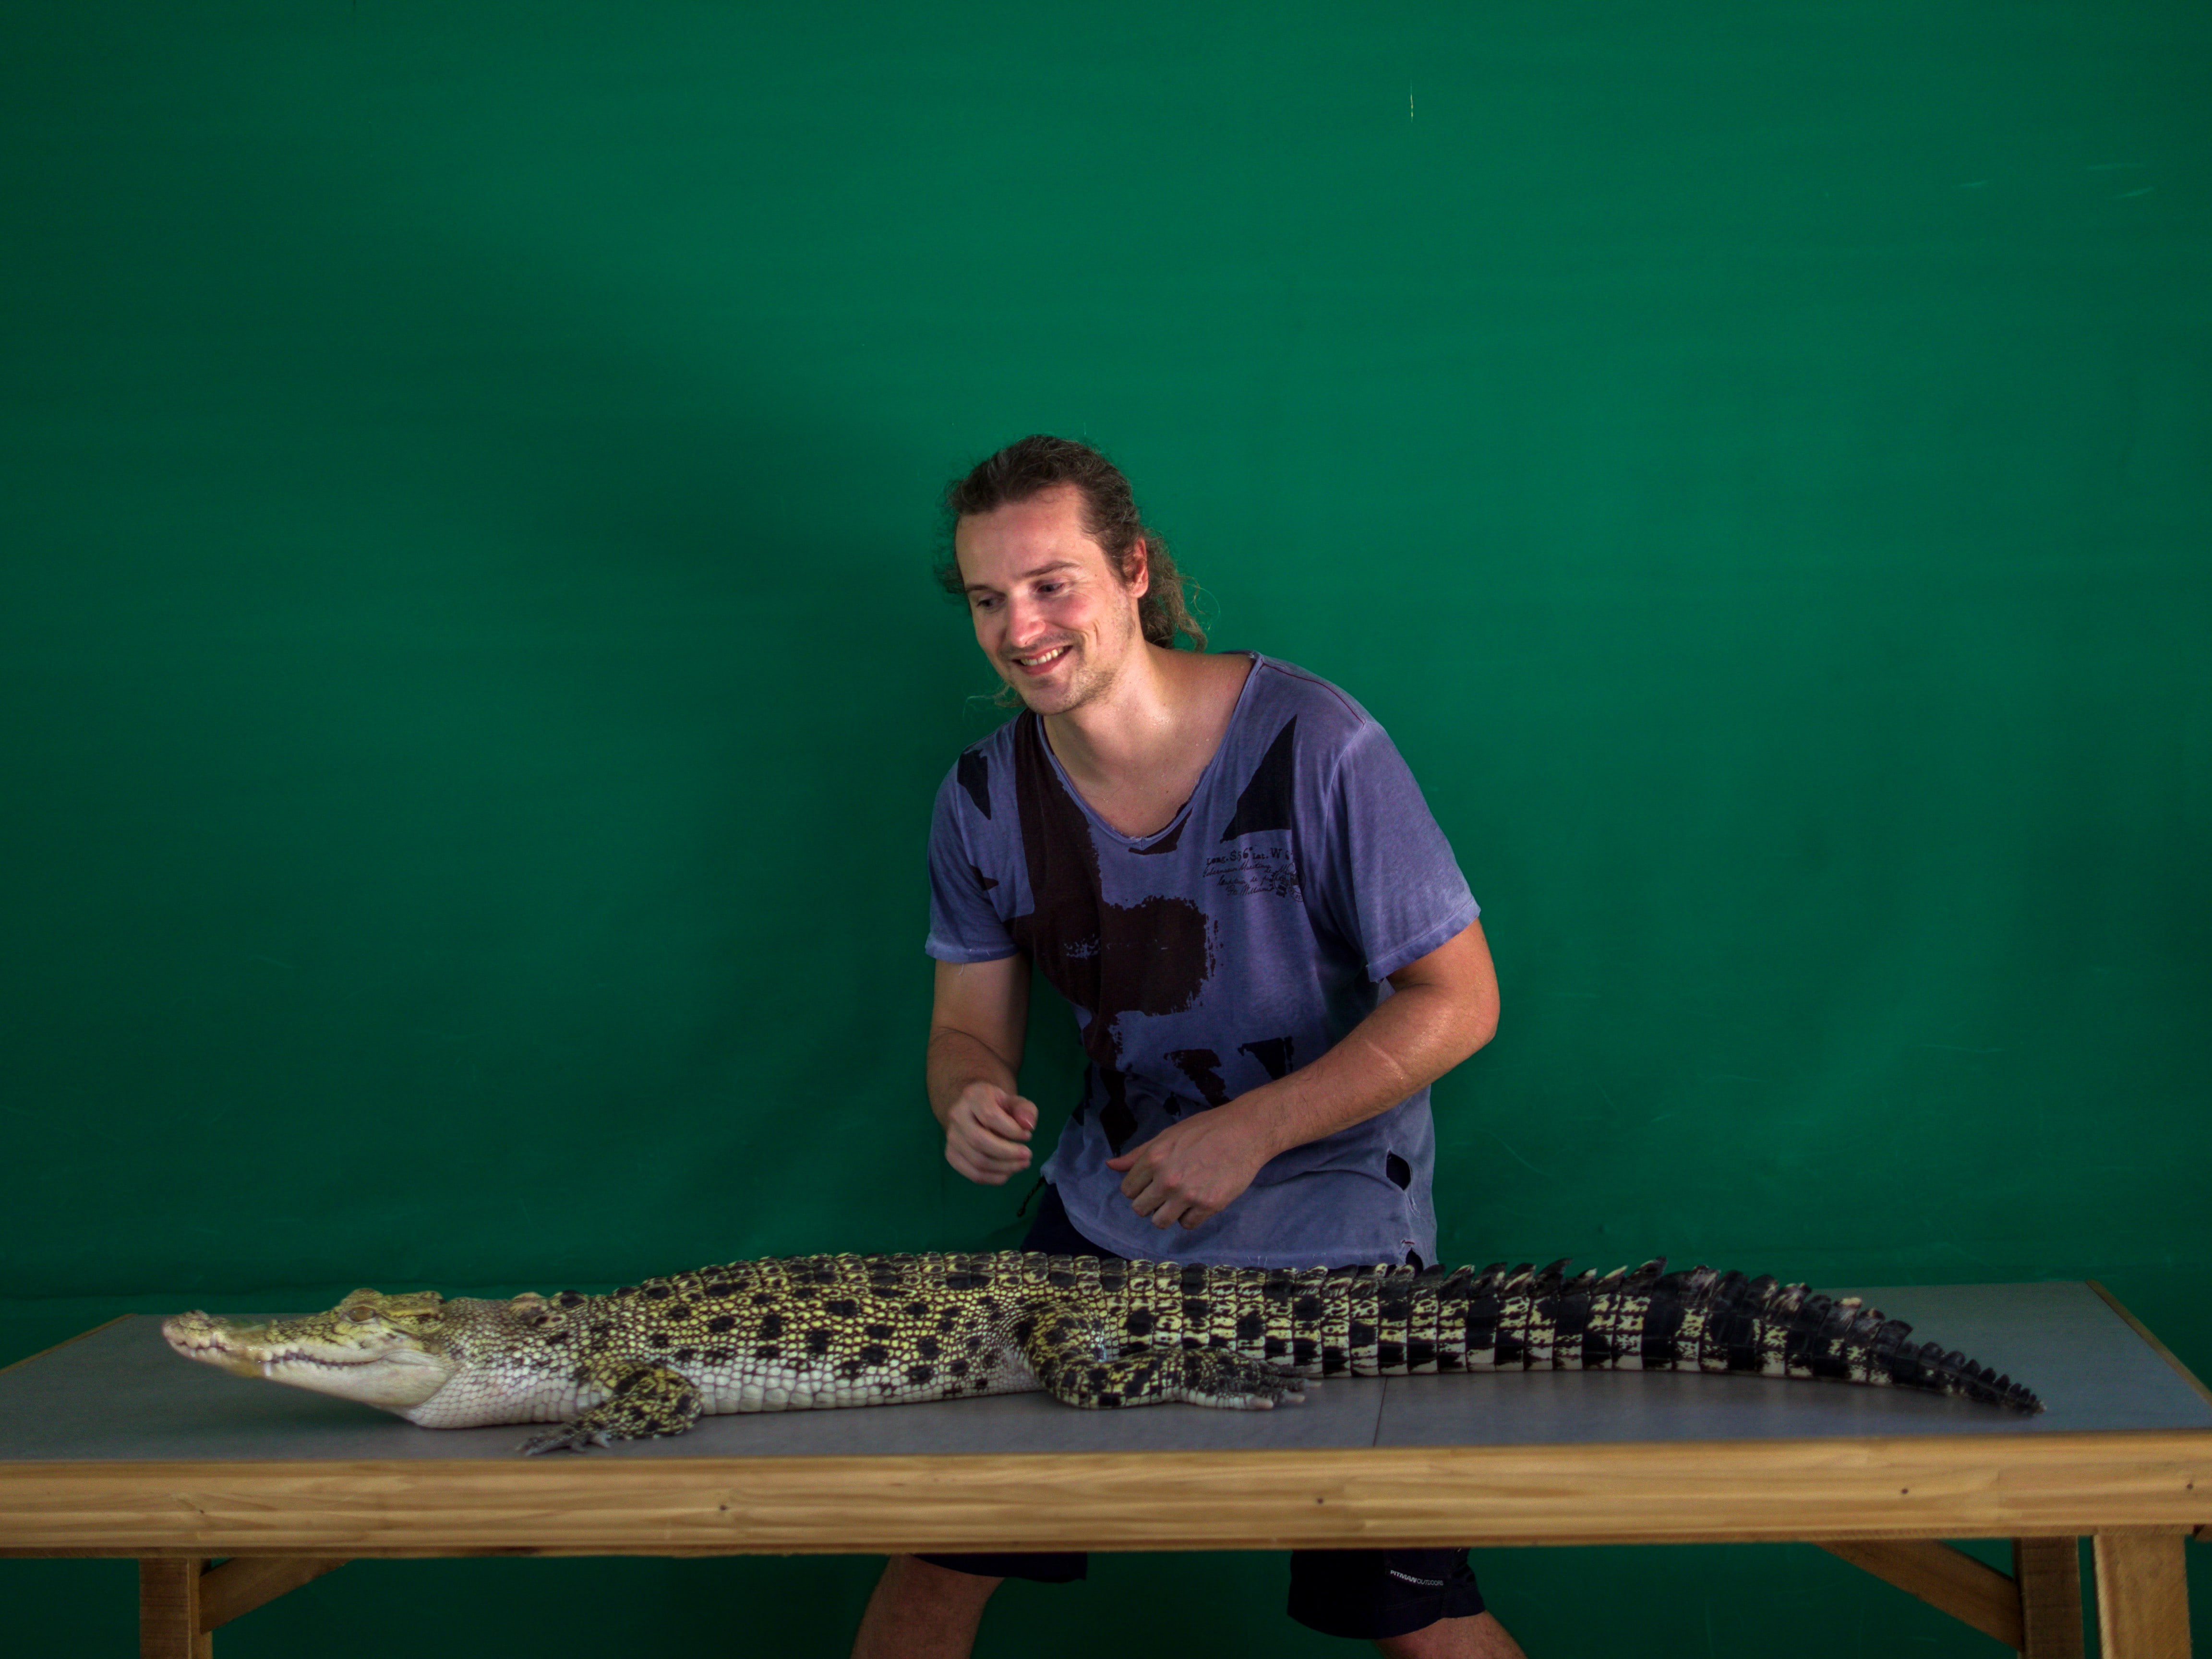 lenny through paradise grabs and poses for photo with little crocodile at Palawan Wildlife Rescue and Conservation Centre